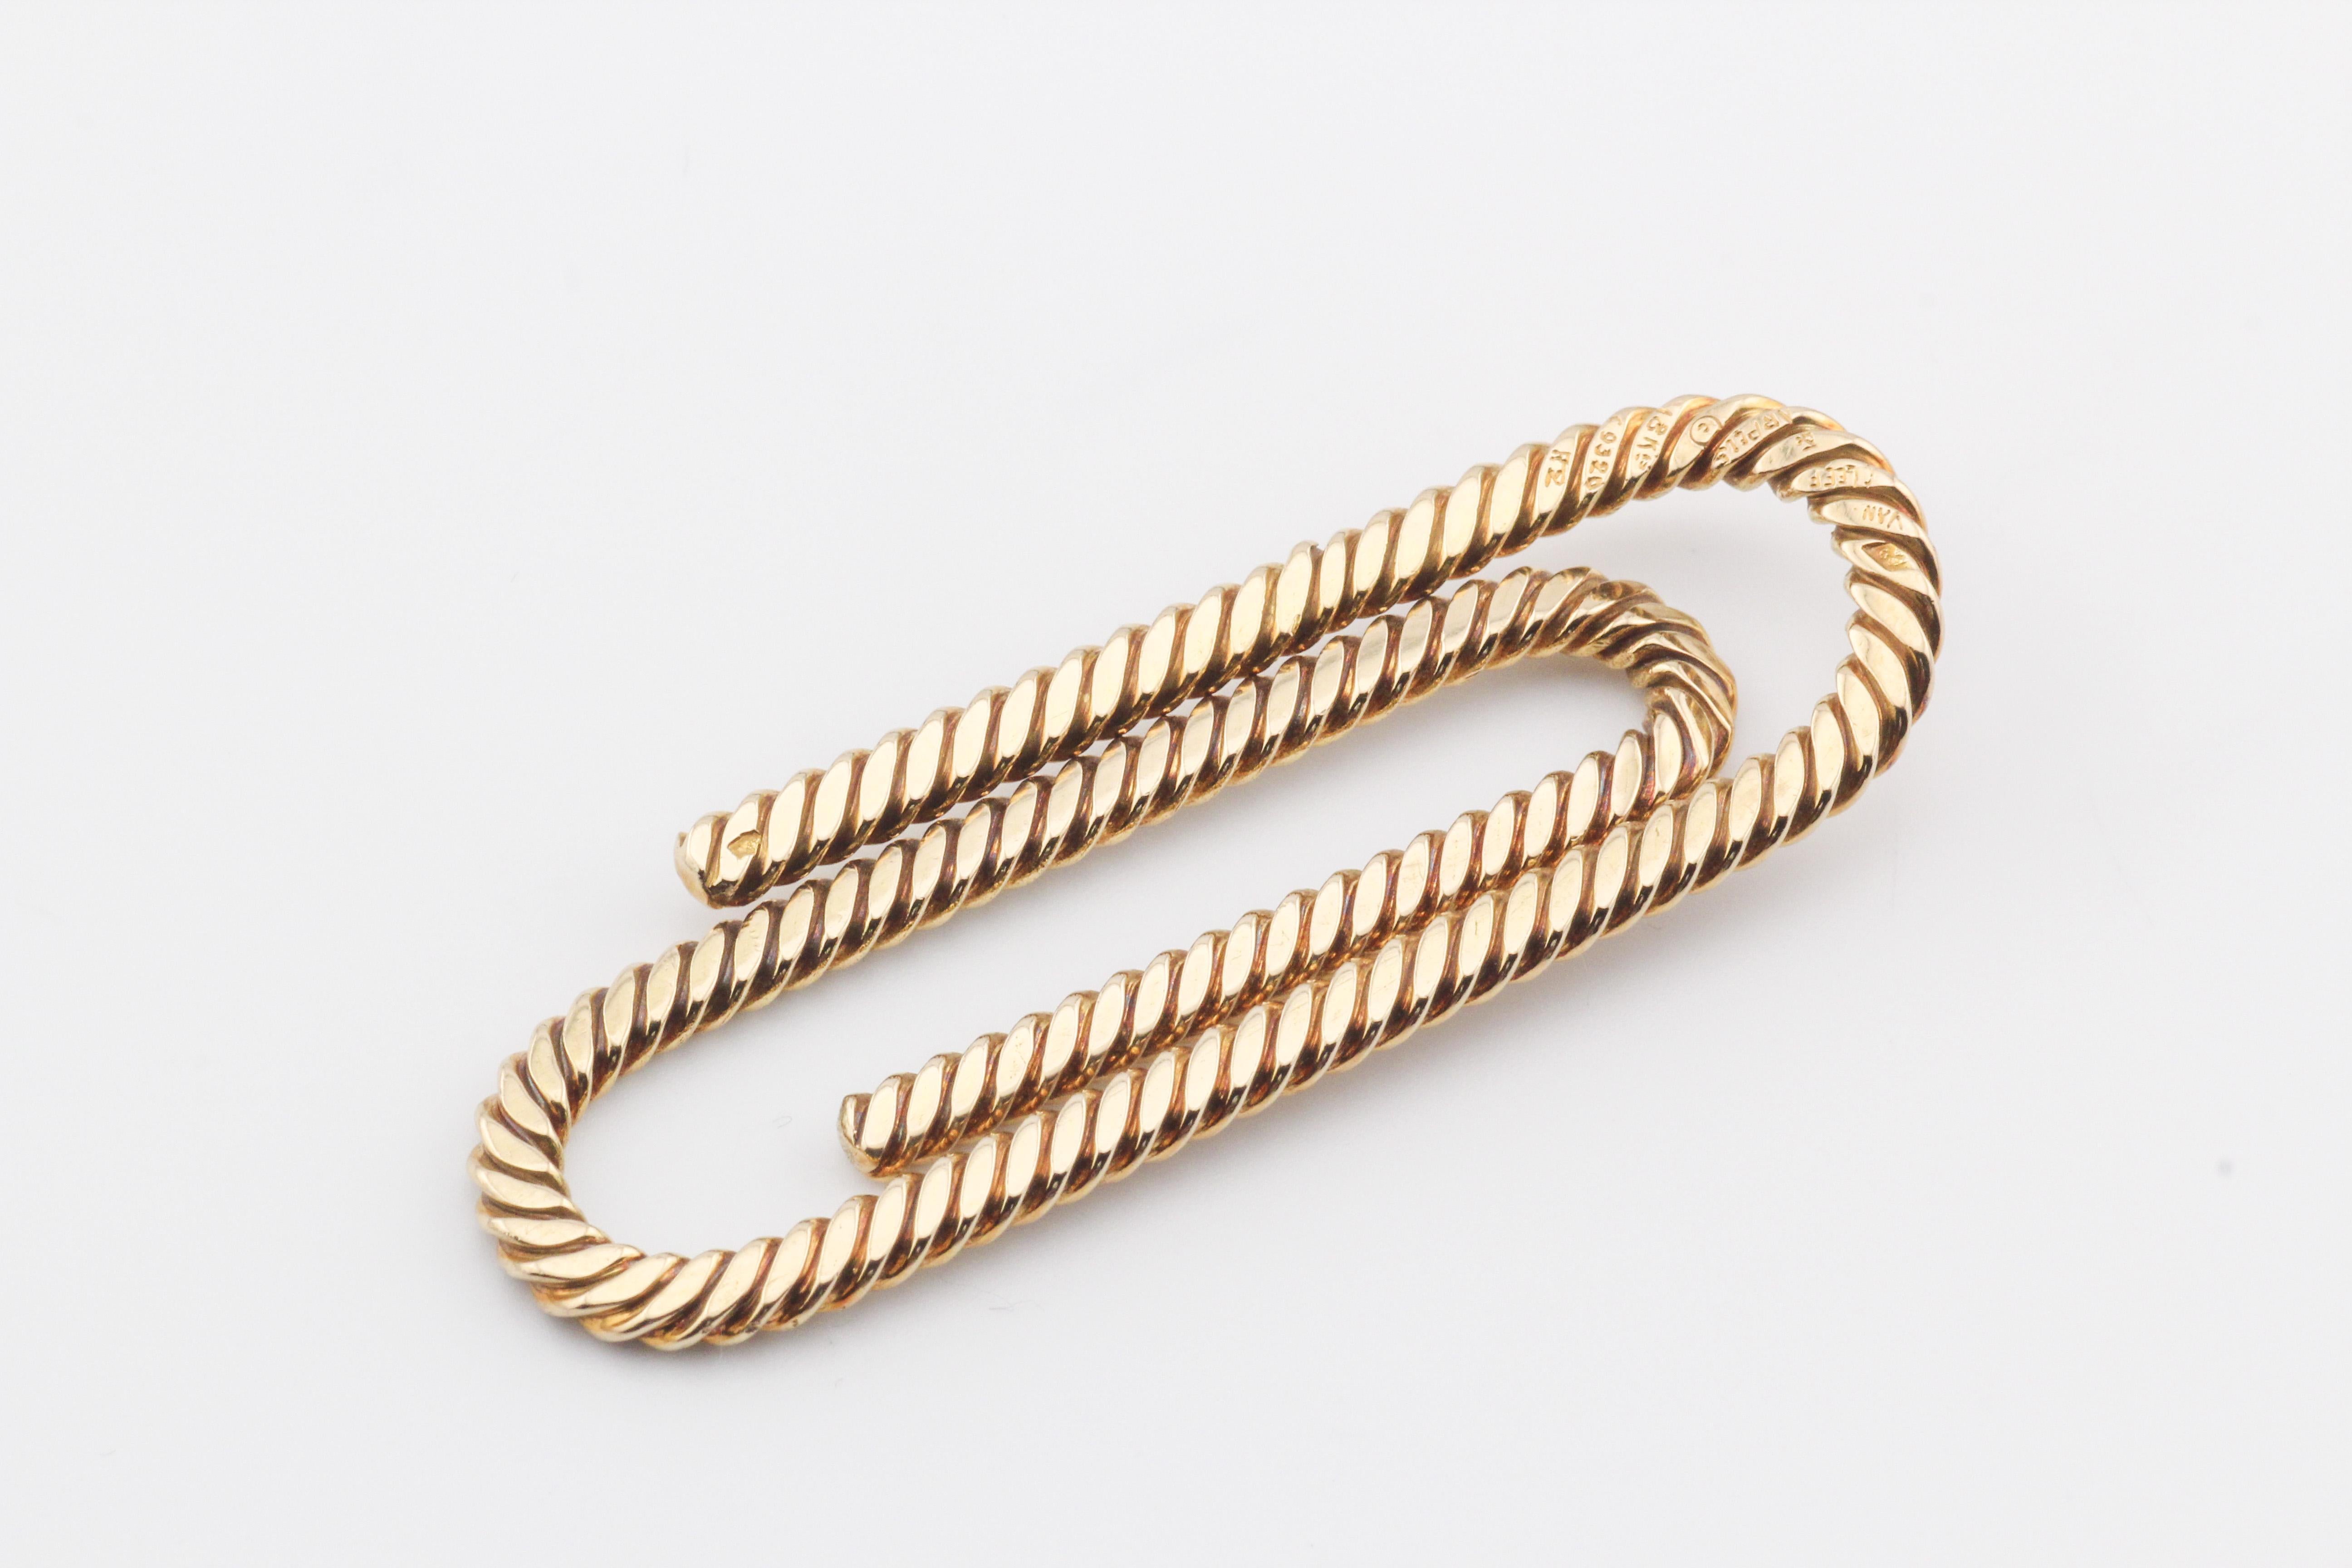 Introducing the Van Cleef & Arpels 18K Yellow Gold Twisted Rope Paper Clip Money Clip – a masterpiece of craftsmanship and elegance. This exquisite accessory seamlessly combines functionality with the brand's signature flair for luxury, showcasing